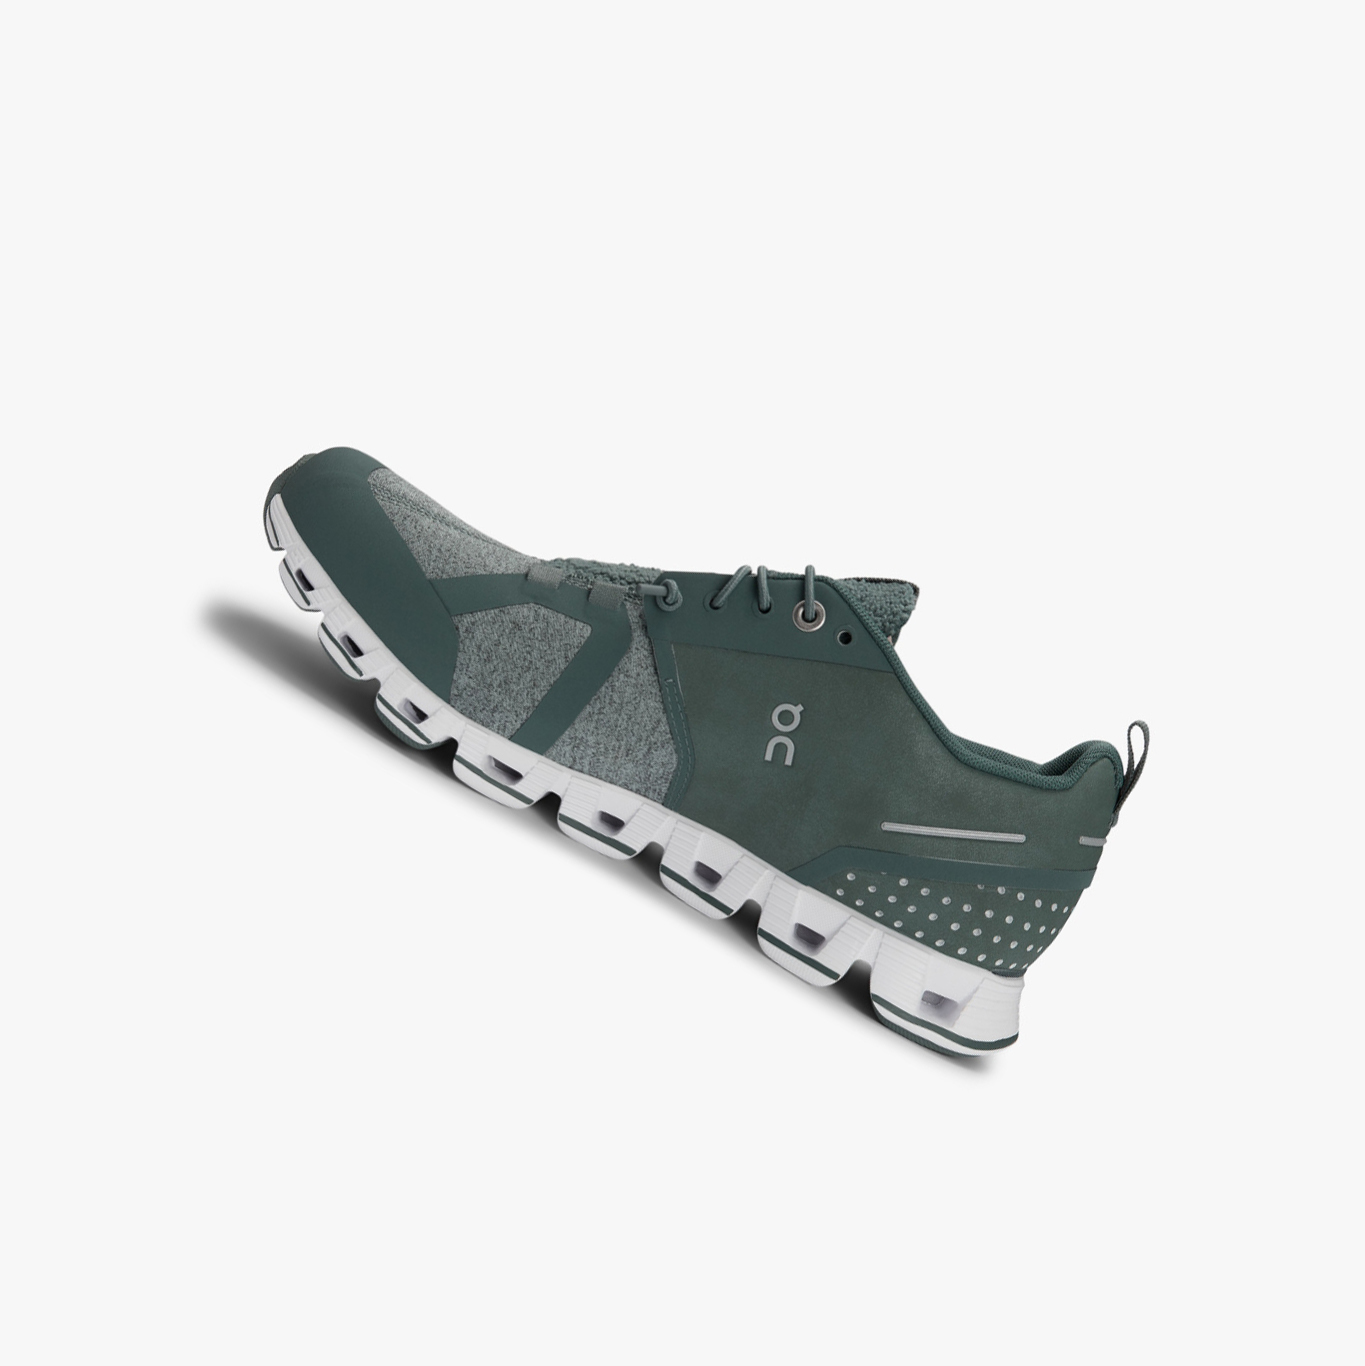 Olive QC Cloud Terry Women's Road Running Shoes | 0000169CA